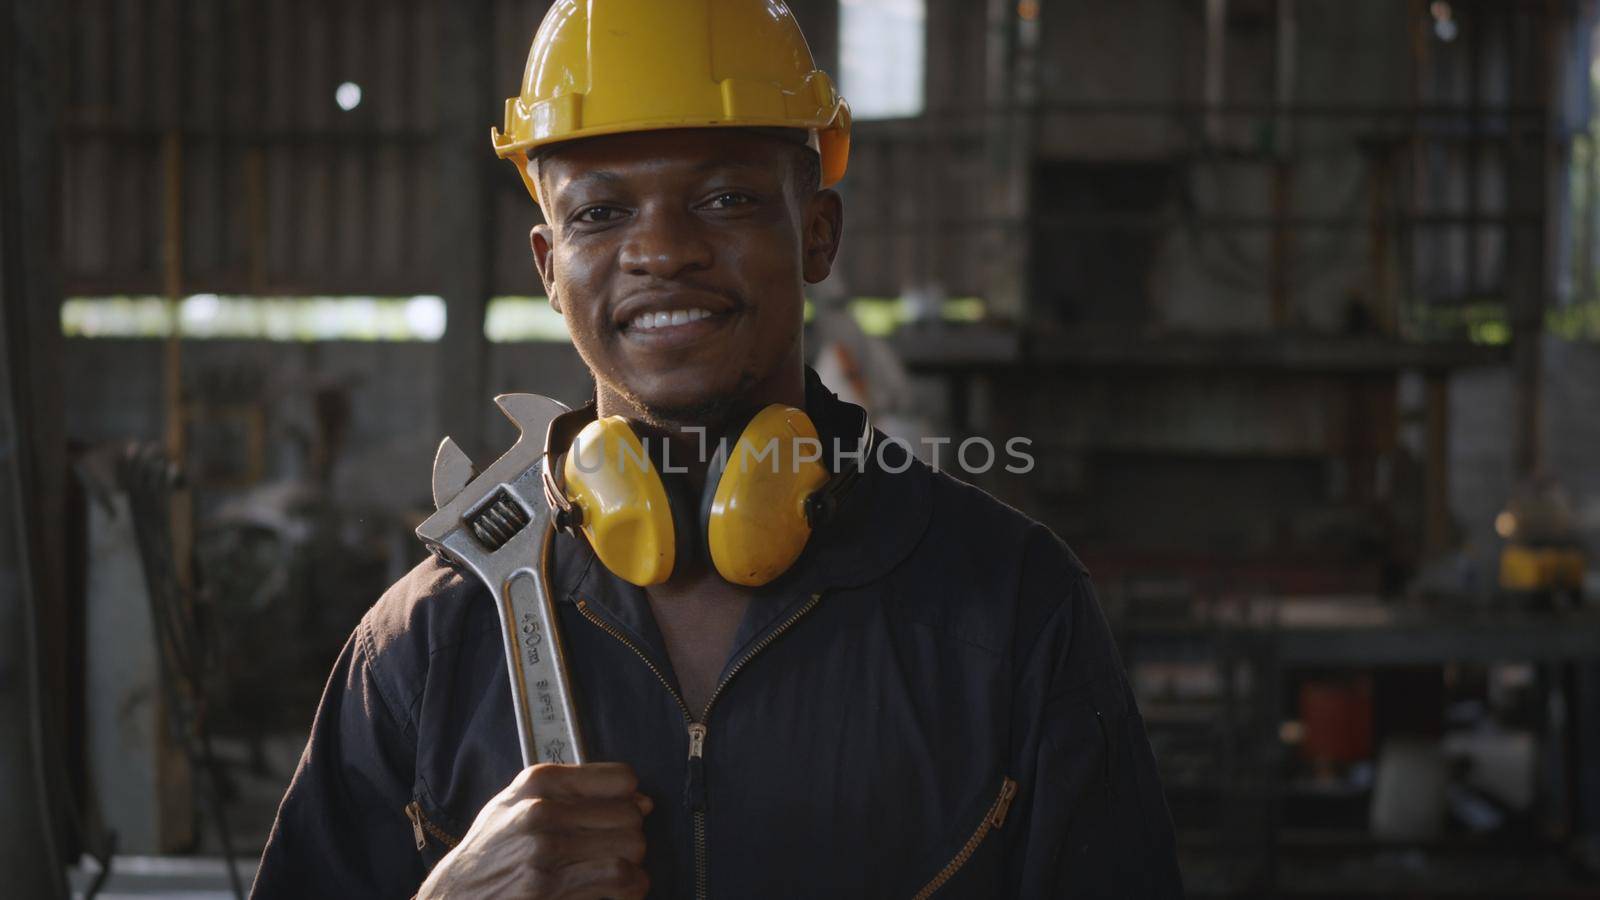 Engineer standing holding wrench on his shoulder at work in industry by Sorapop